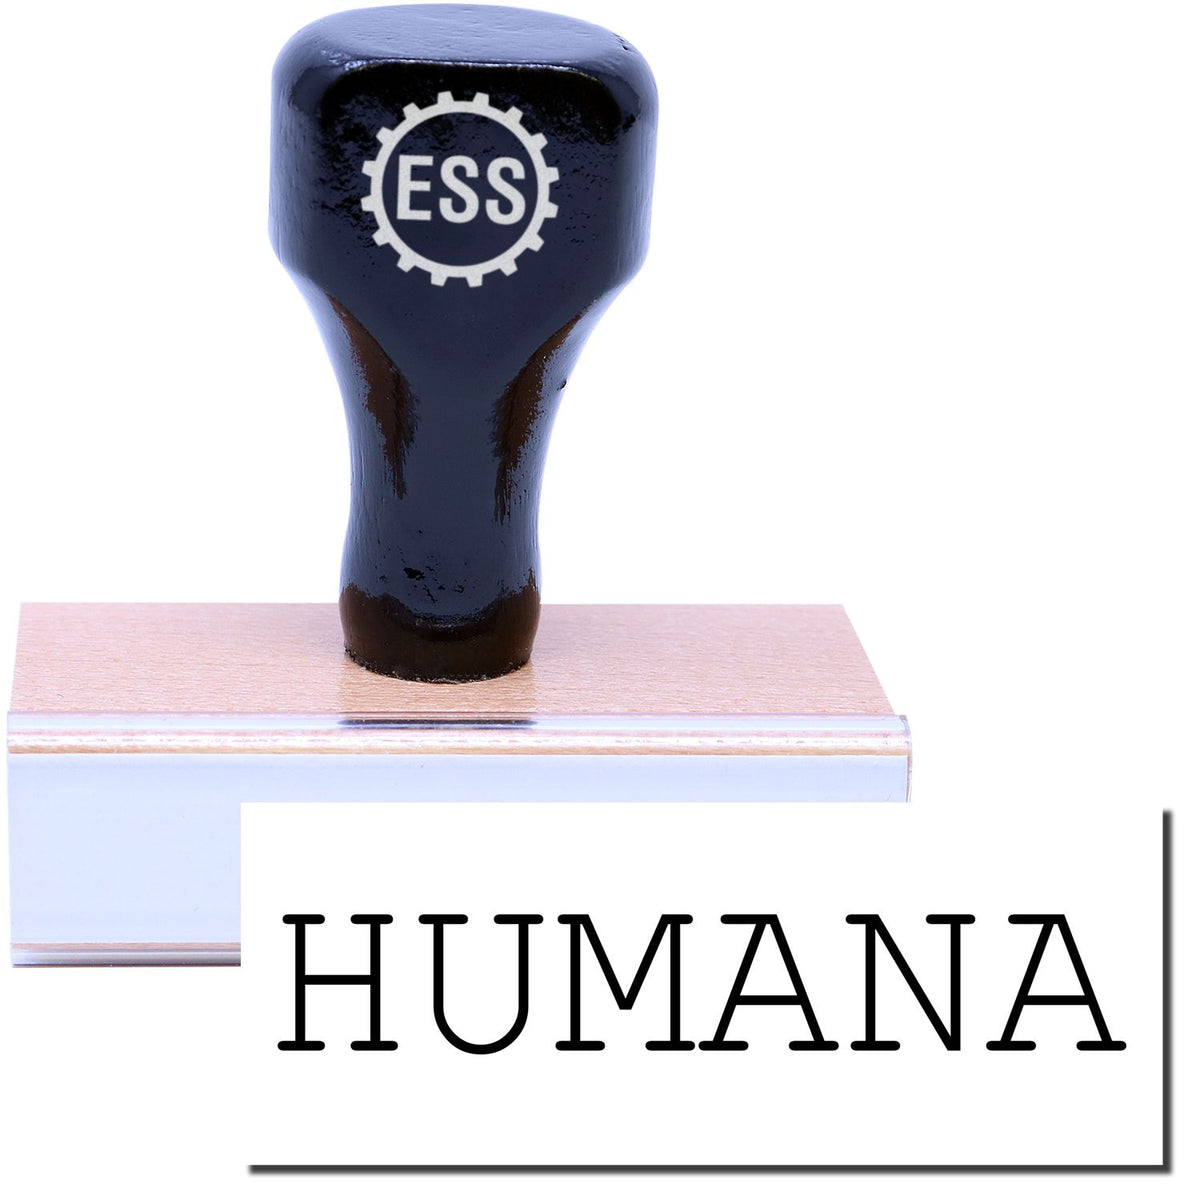 A stock office medical rubber stamp with a stamped image showing how the text &quot;HUMANA&quot; is displayed after stamping.